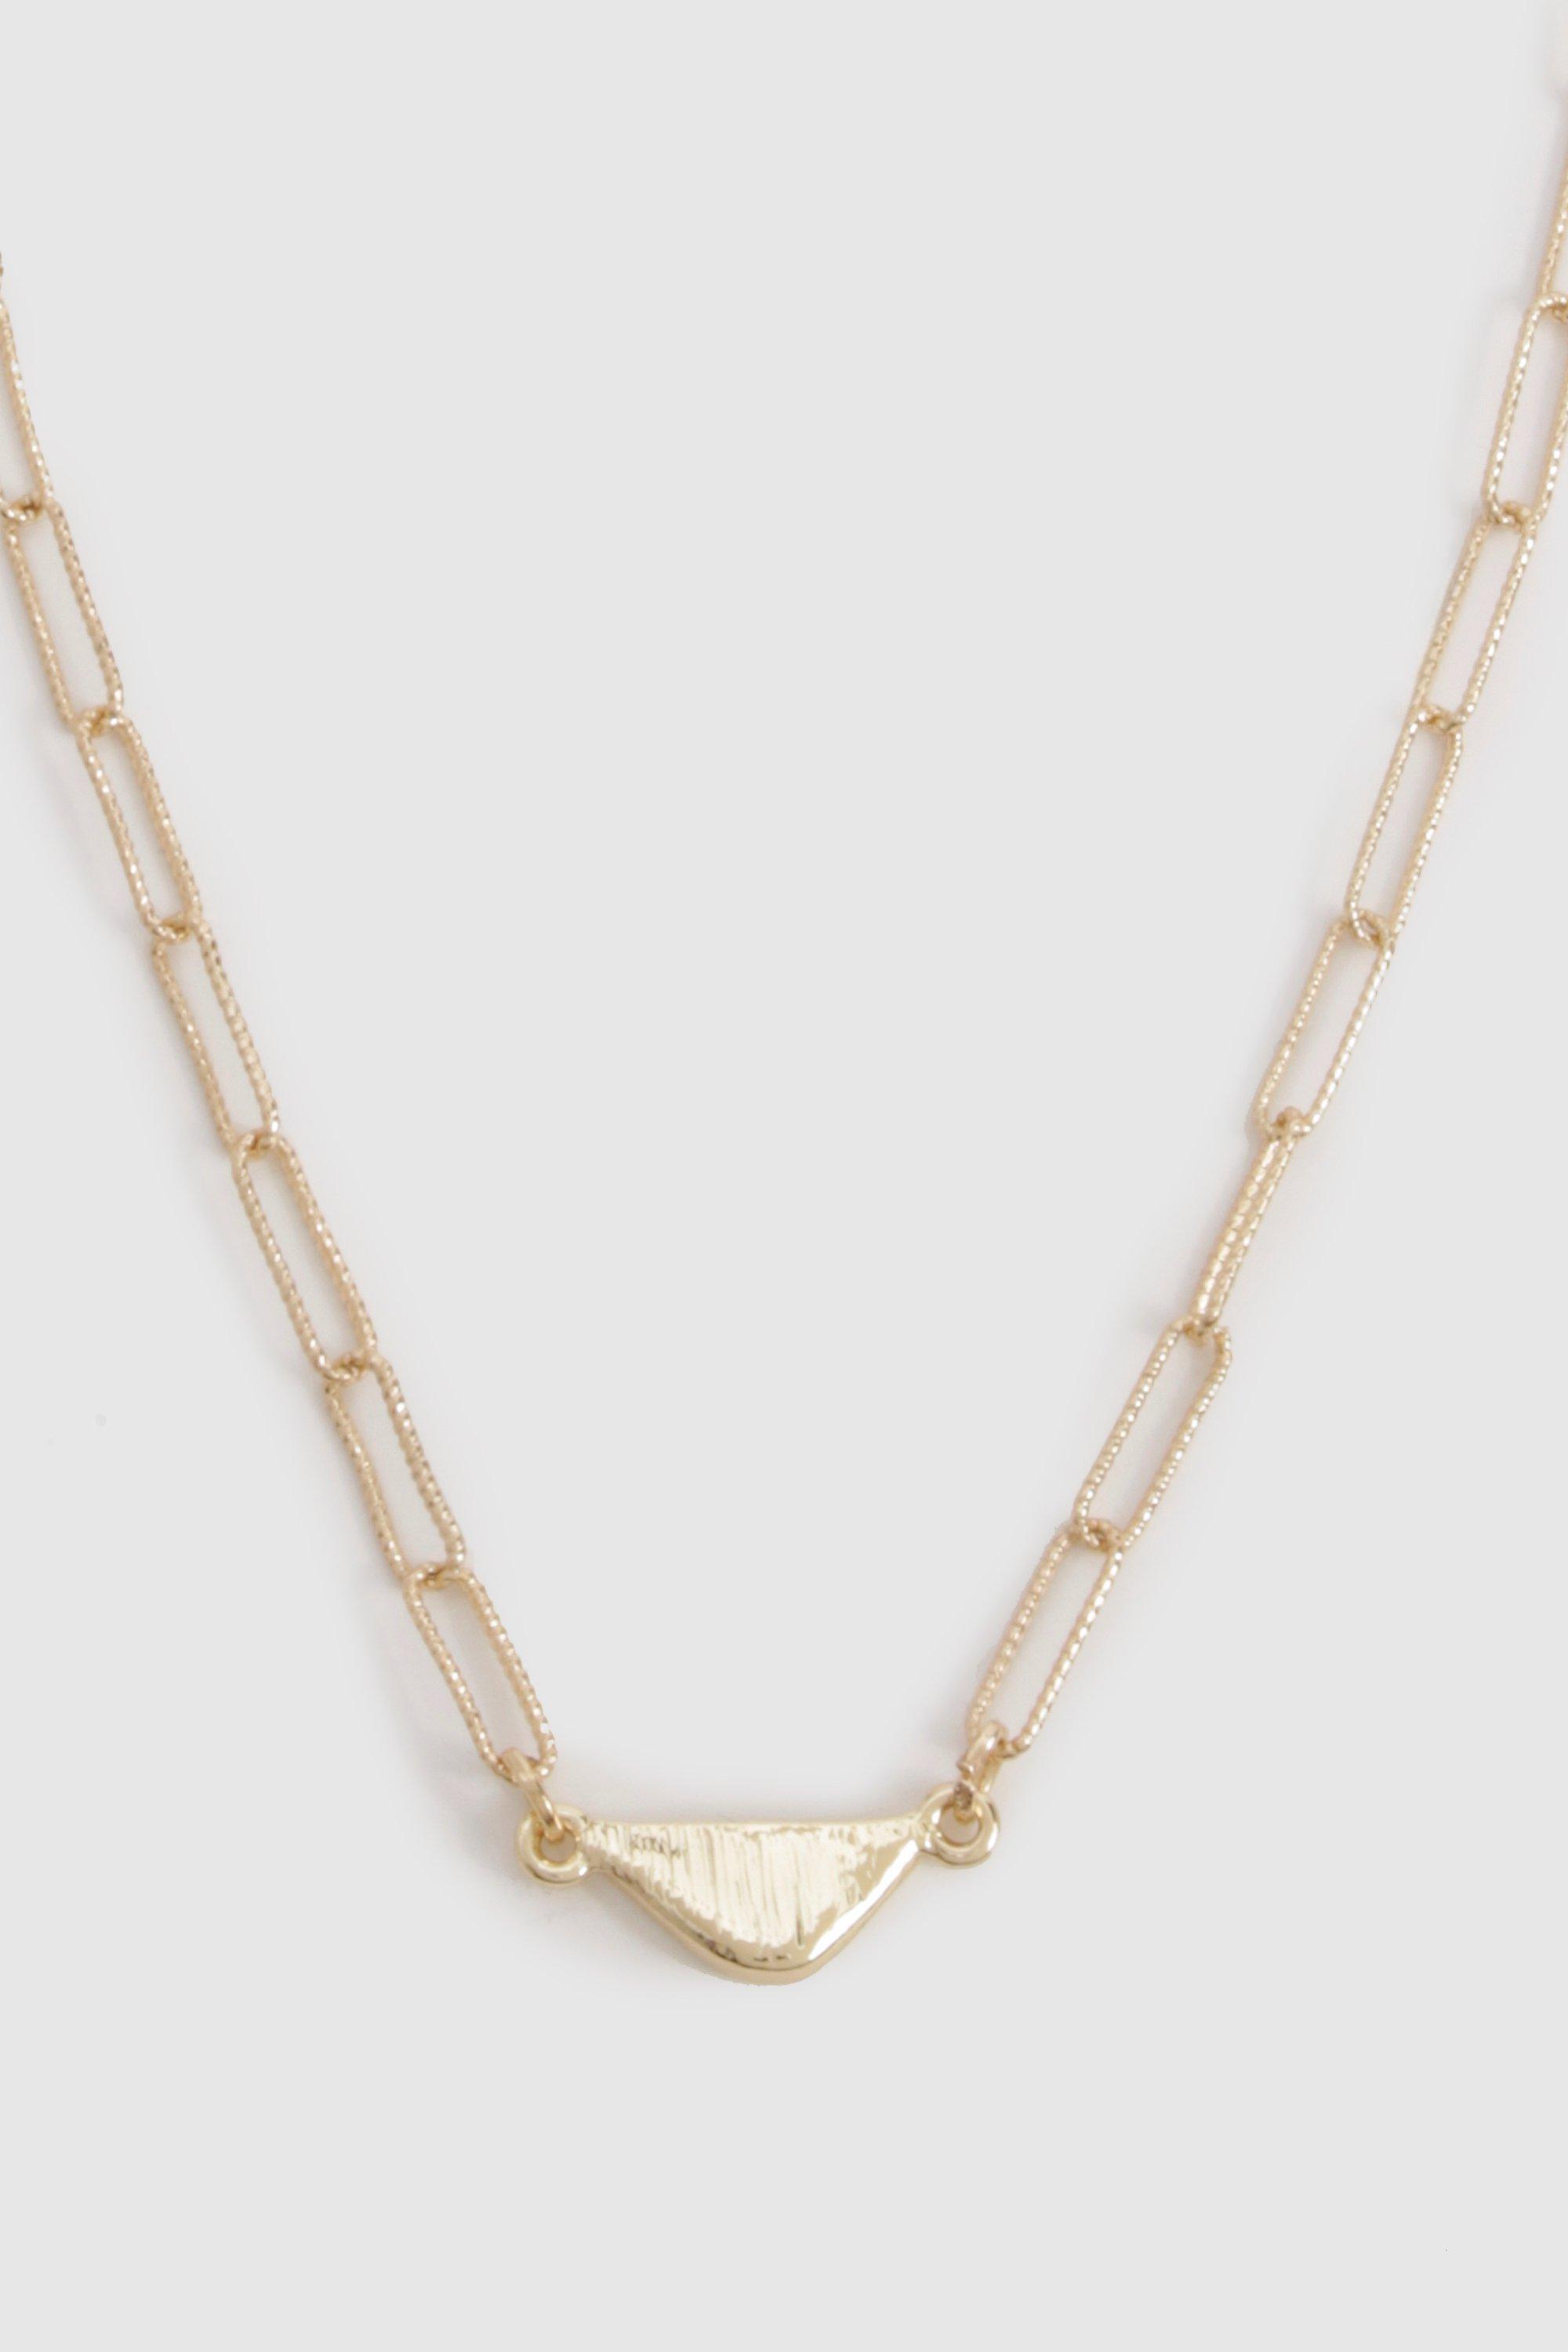 Image of Triangle Detail Chain Link Necklace, Metallics